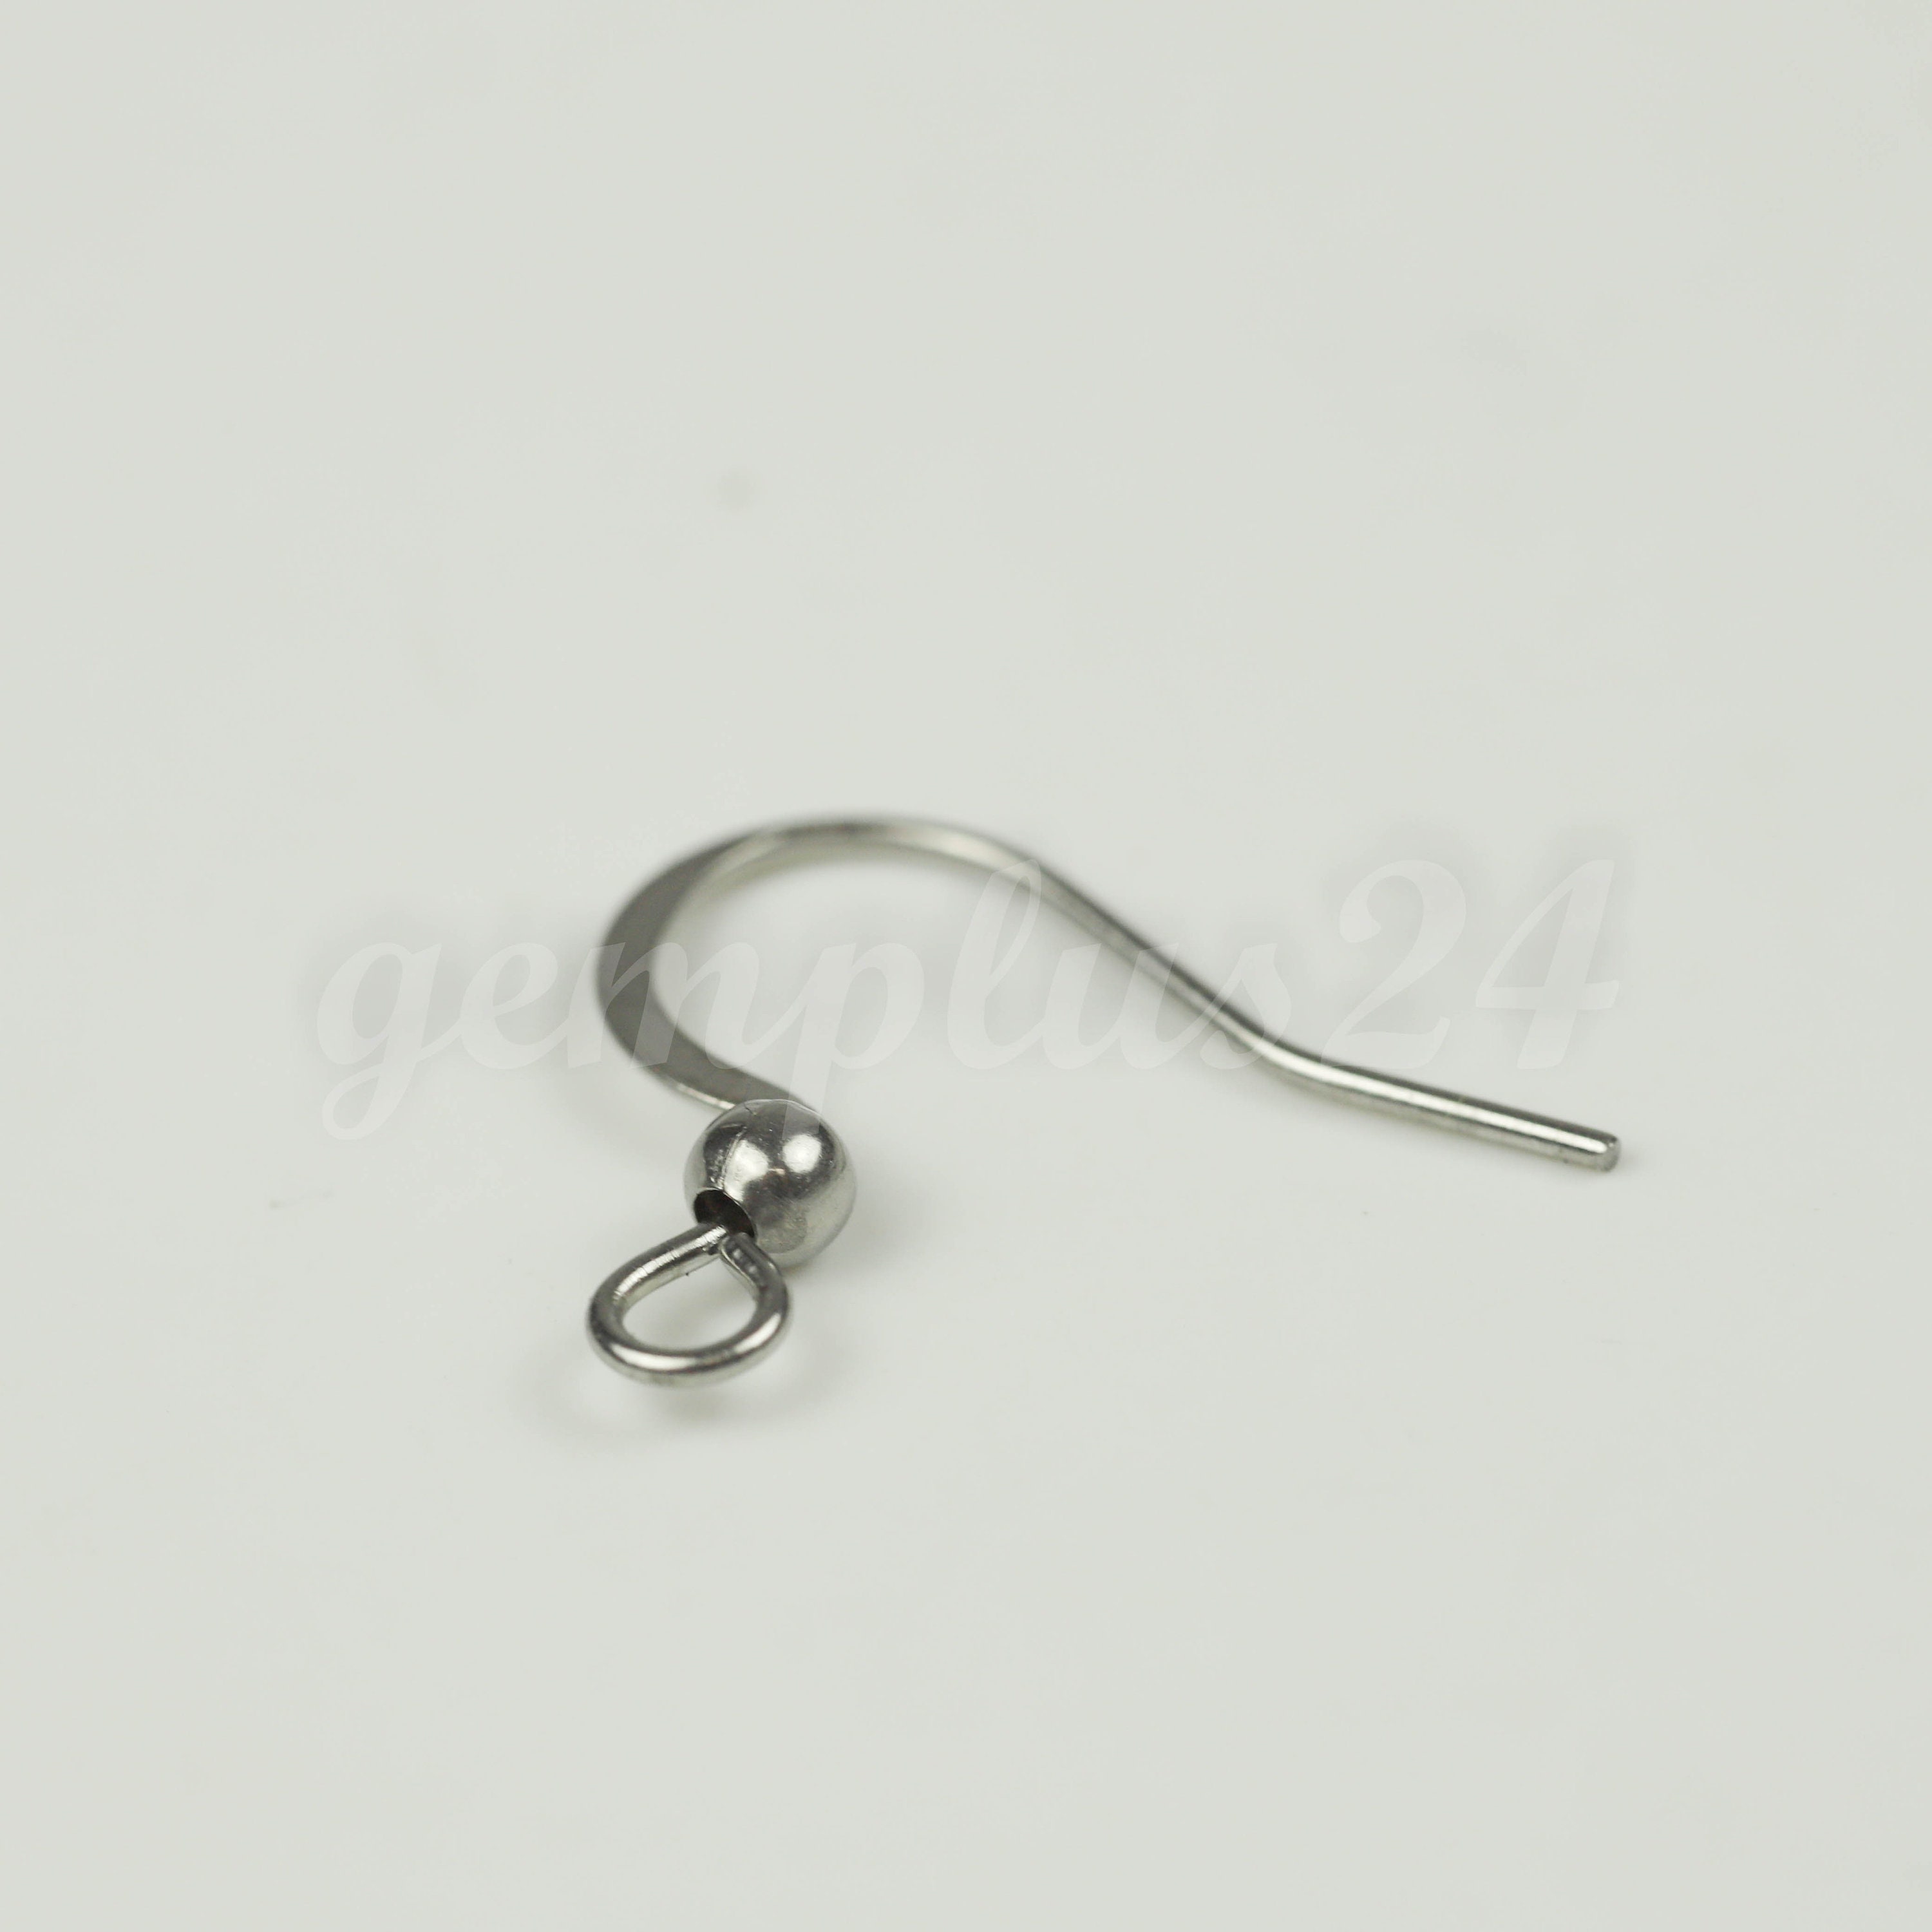 Hypoallergenic Surgical 316L Stainless Steel French Hook Earrings, Fish  Hook Earring Wires - Gold - SEE COUPON